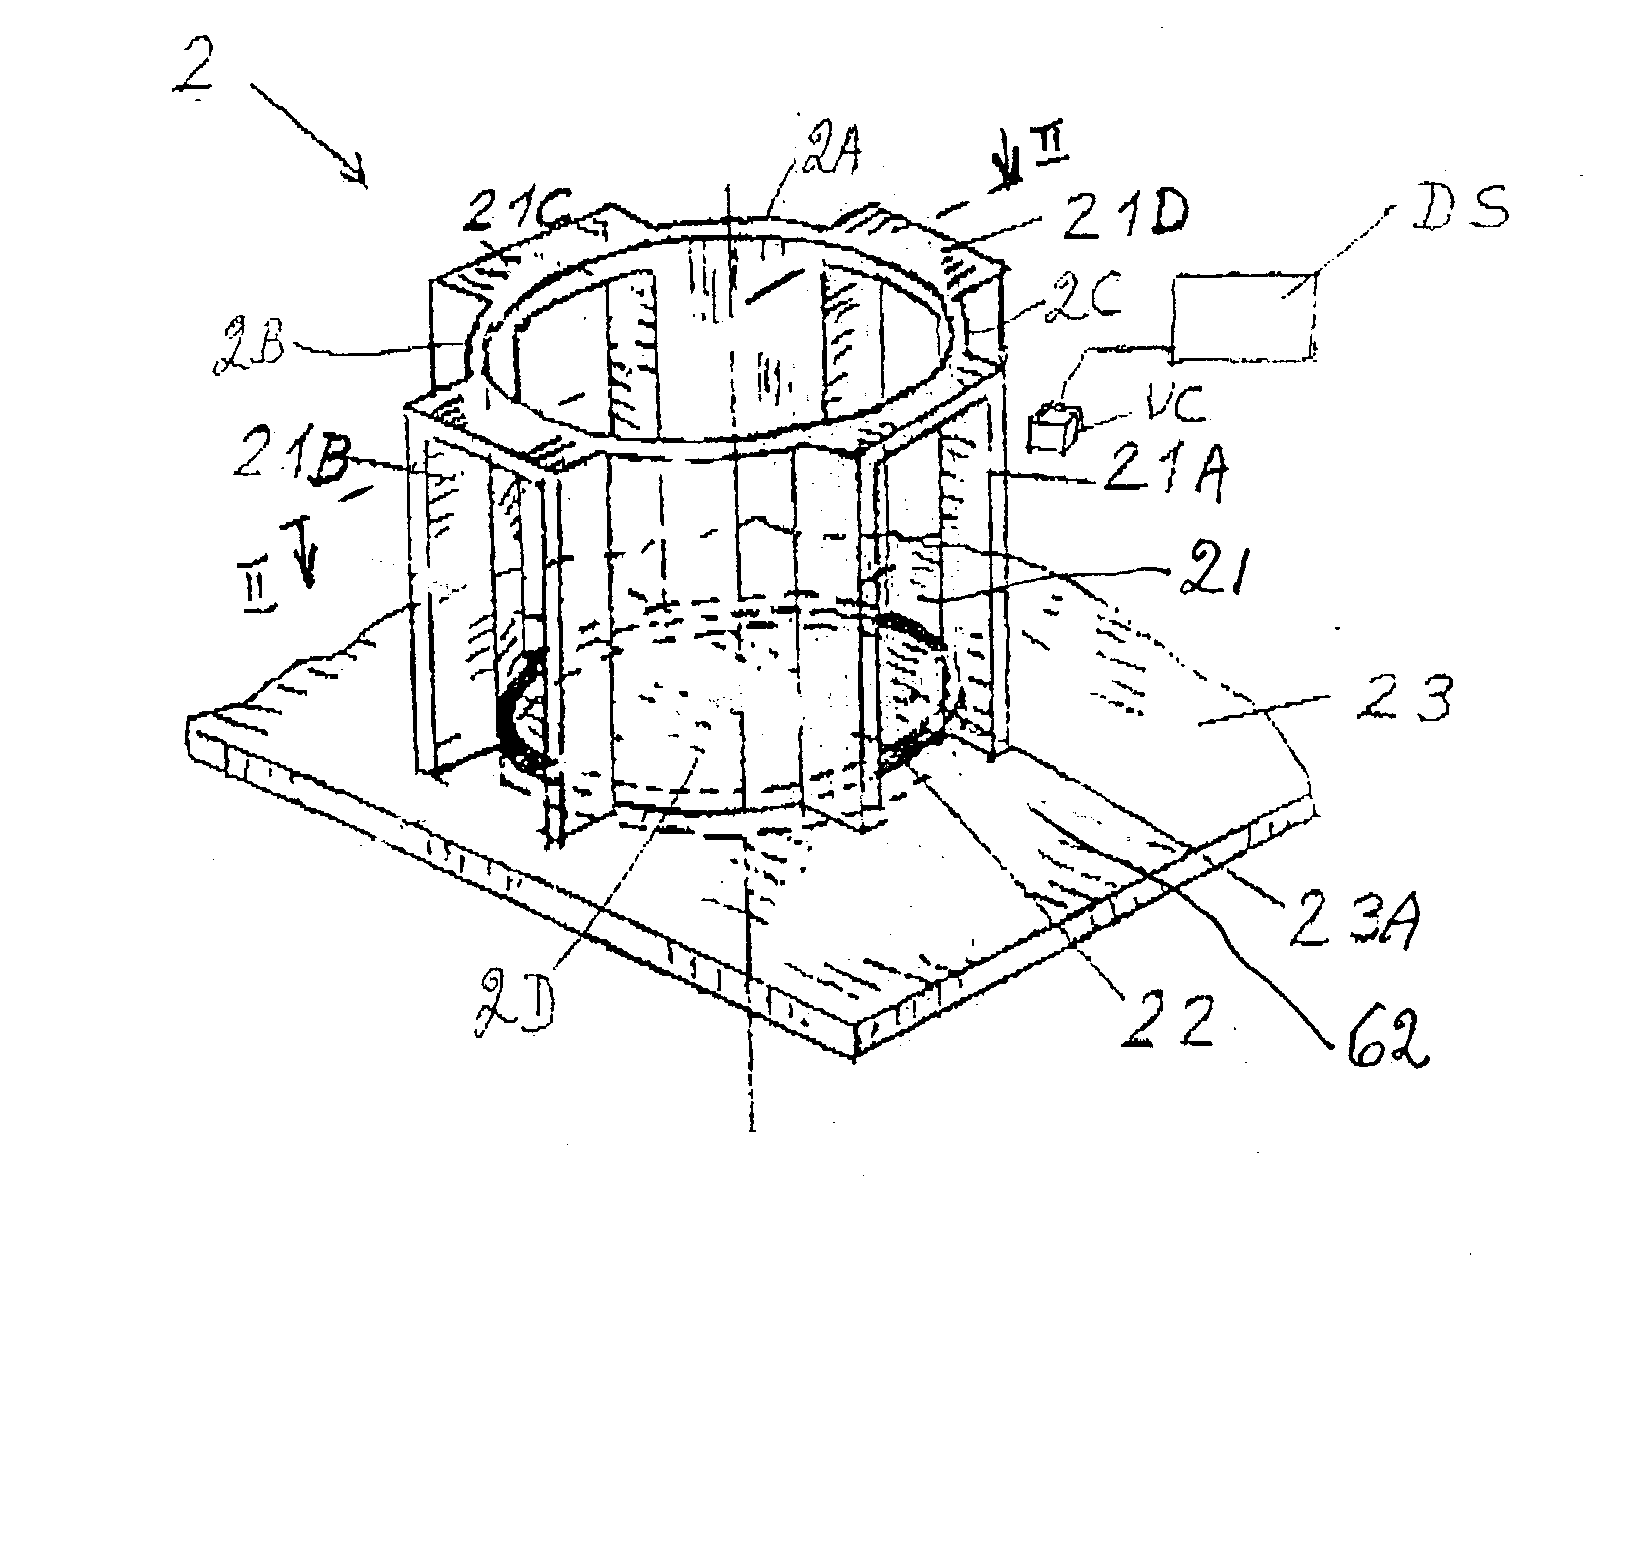 Apparatus for controlling the ingress and egress to and from an operator's compartment